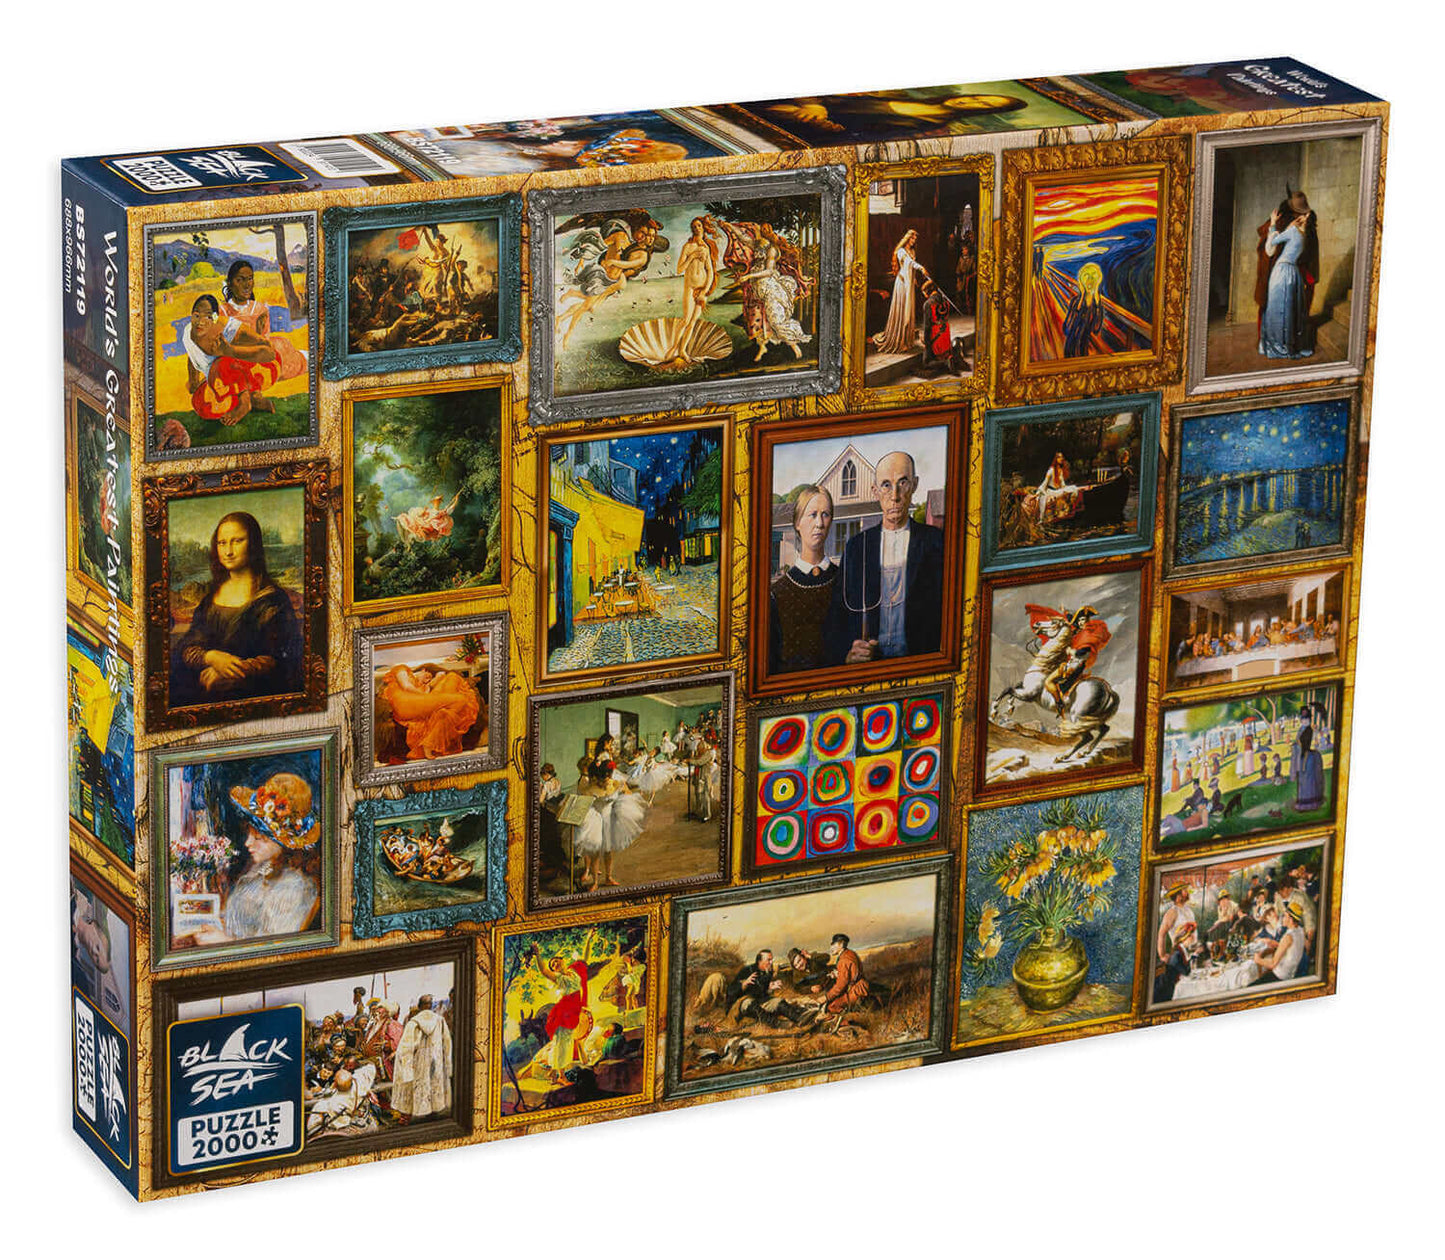 Puzzle Black Sea 2000 pieces - World's Greatest Paintings, Why enjoy just one painting when you could have 25? In front of you is a skillful collage made up of some of the greatest artworks of the visual arts, amongst which are masterpieces like Mona Lisa